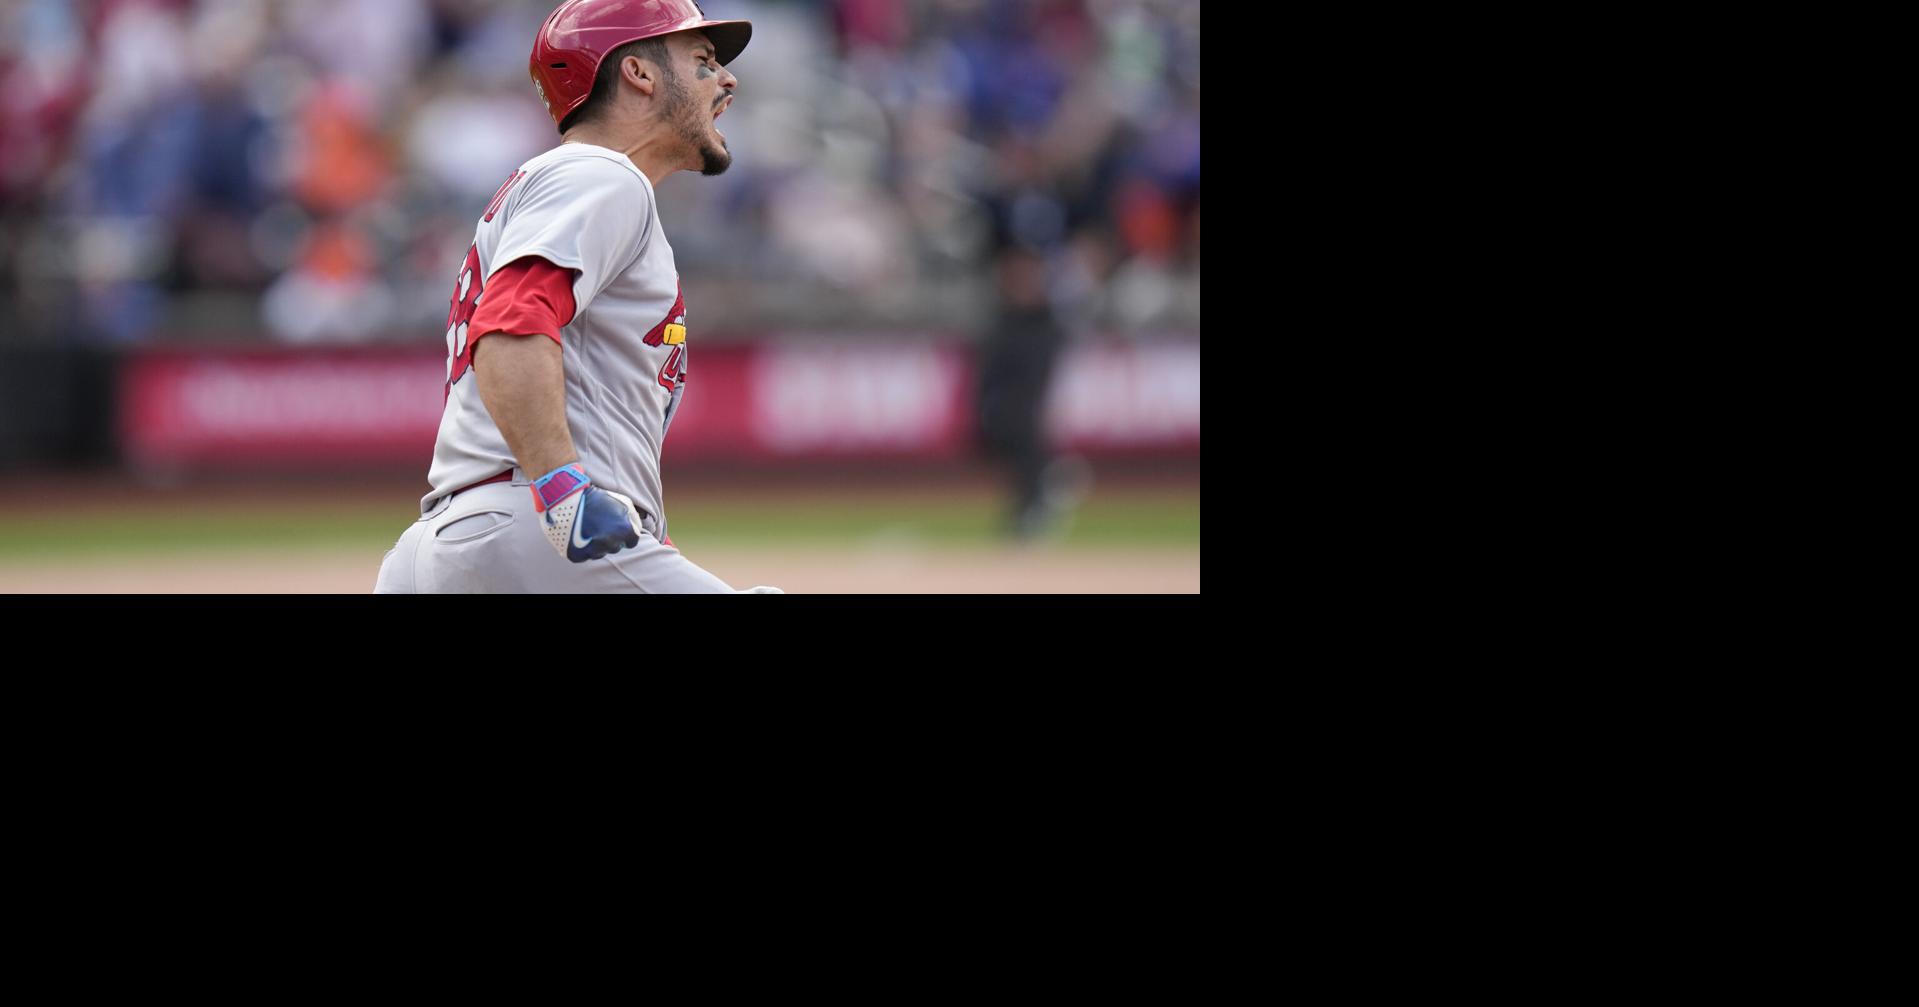 Father shows best: Nolan Arenado lifts Cardinals with two homers on his  first Father's Day